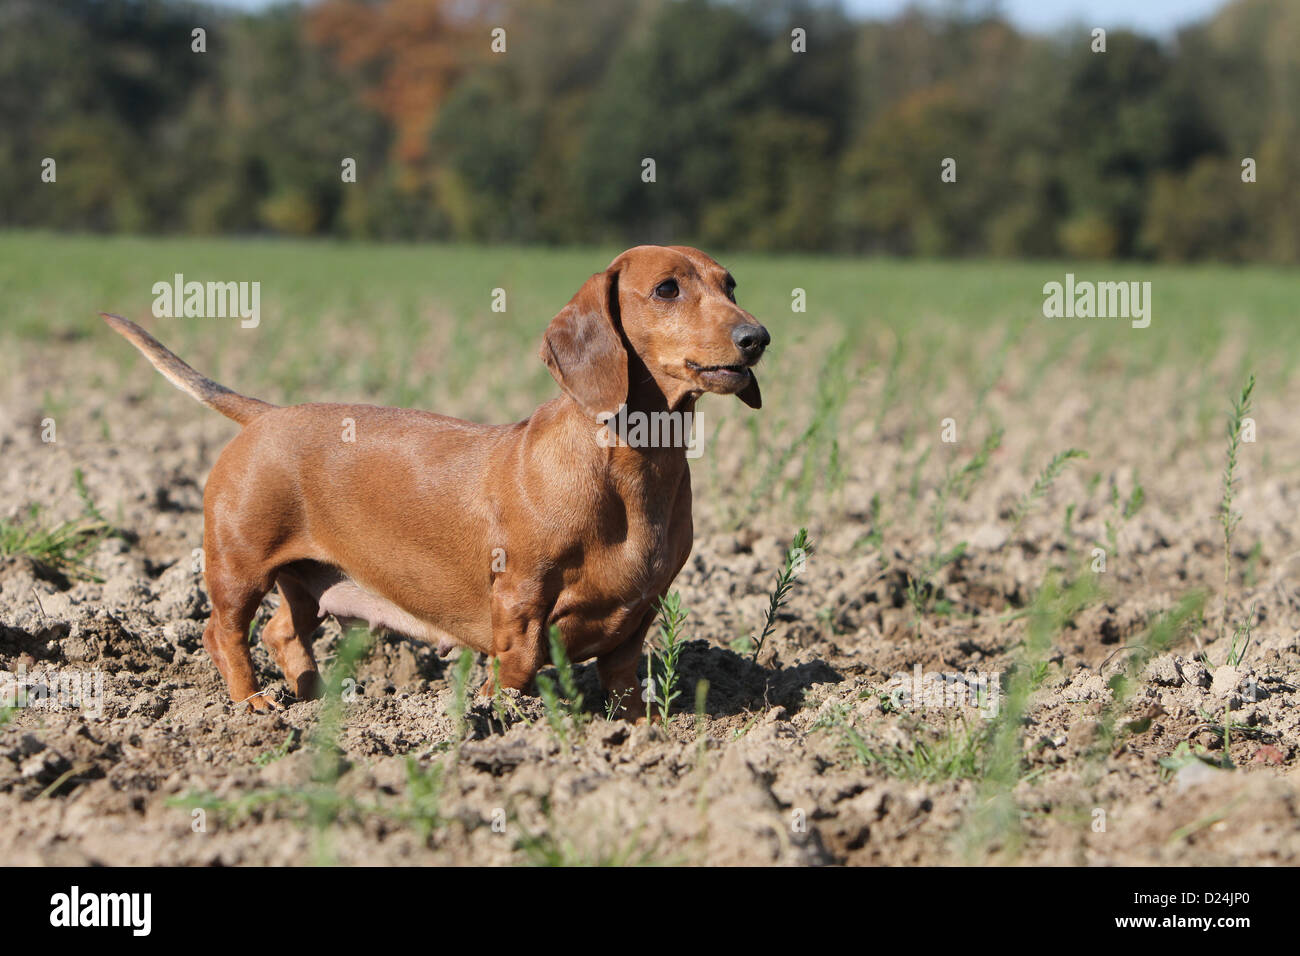 Dog Dachshund /  Dackel / Teckel  shorthaired adult red standing in a field Stock Photo